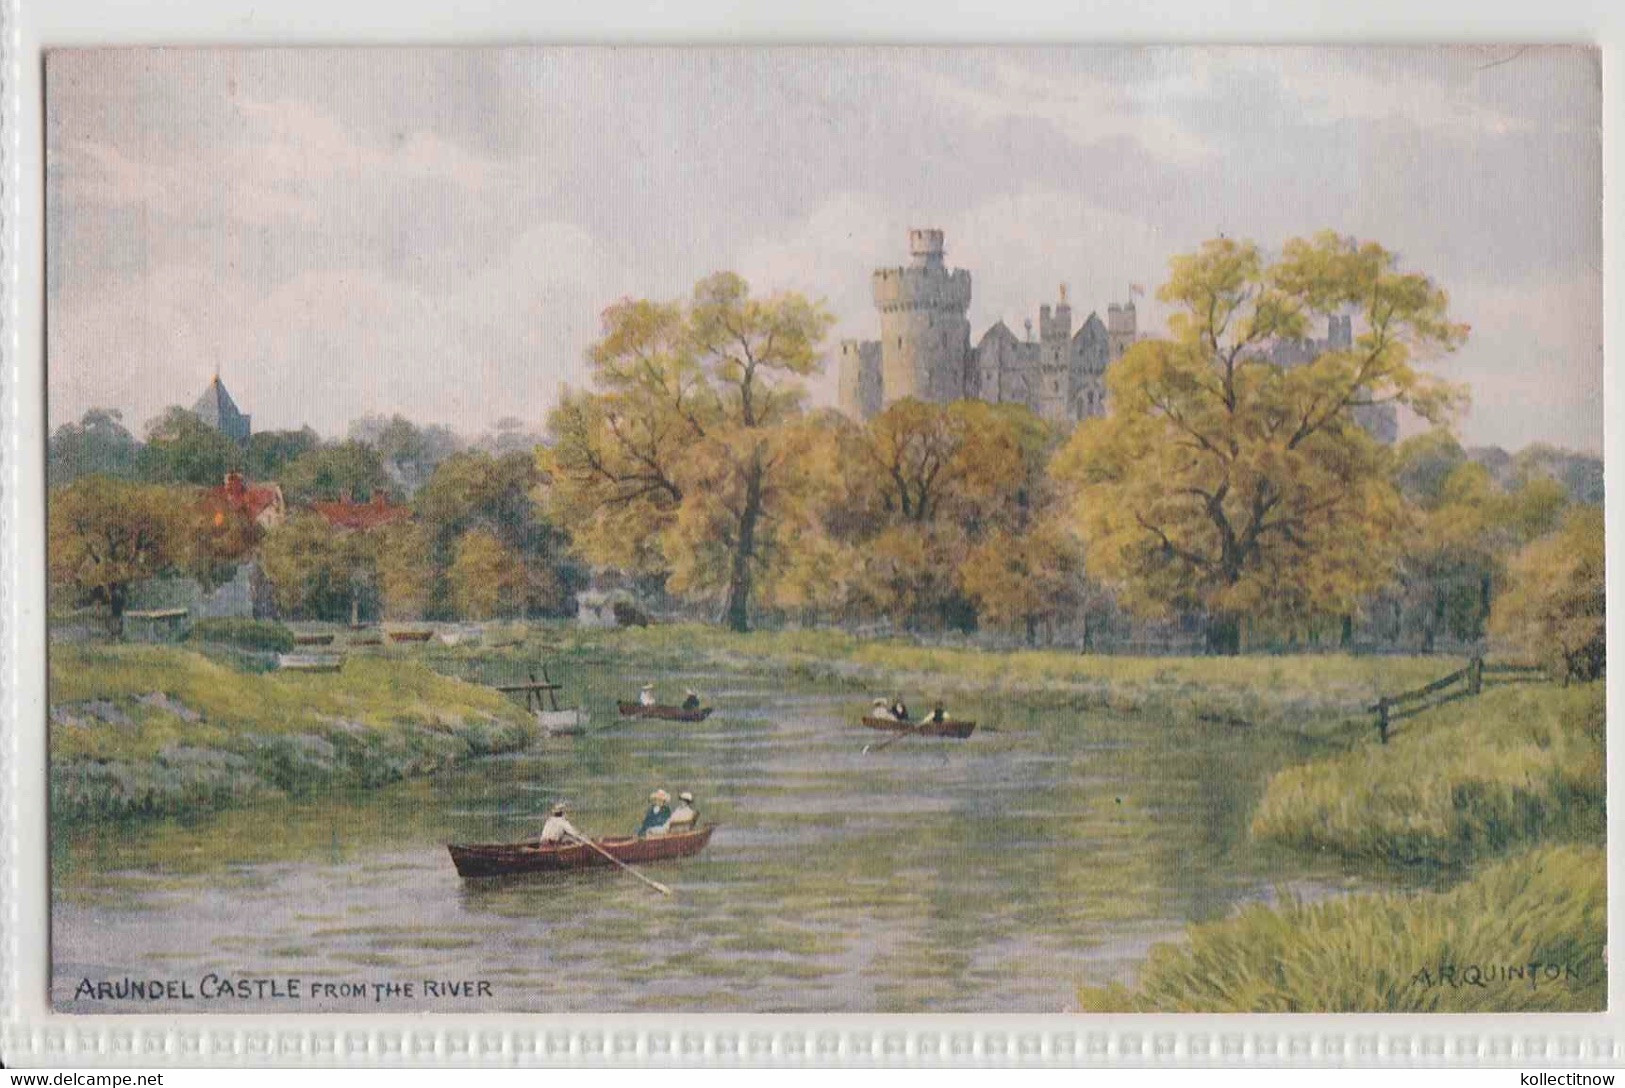 ARUNDEL CASTLE FROM THE RIVER - WEST SUSSEX - BY AR QUINTON - Arundel